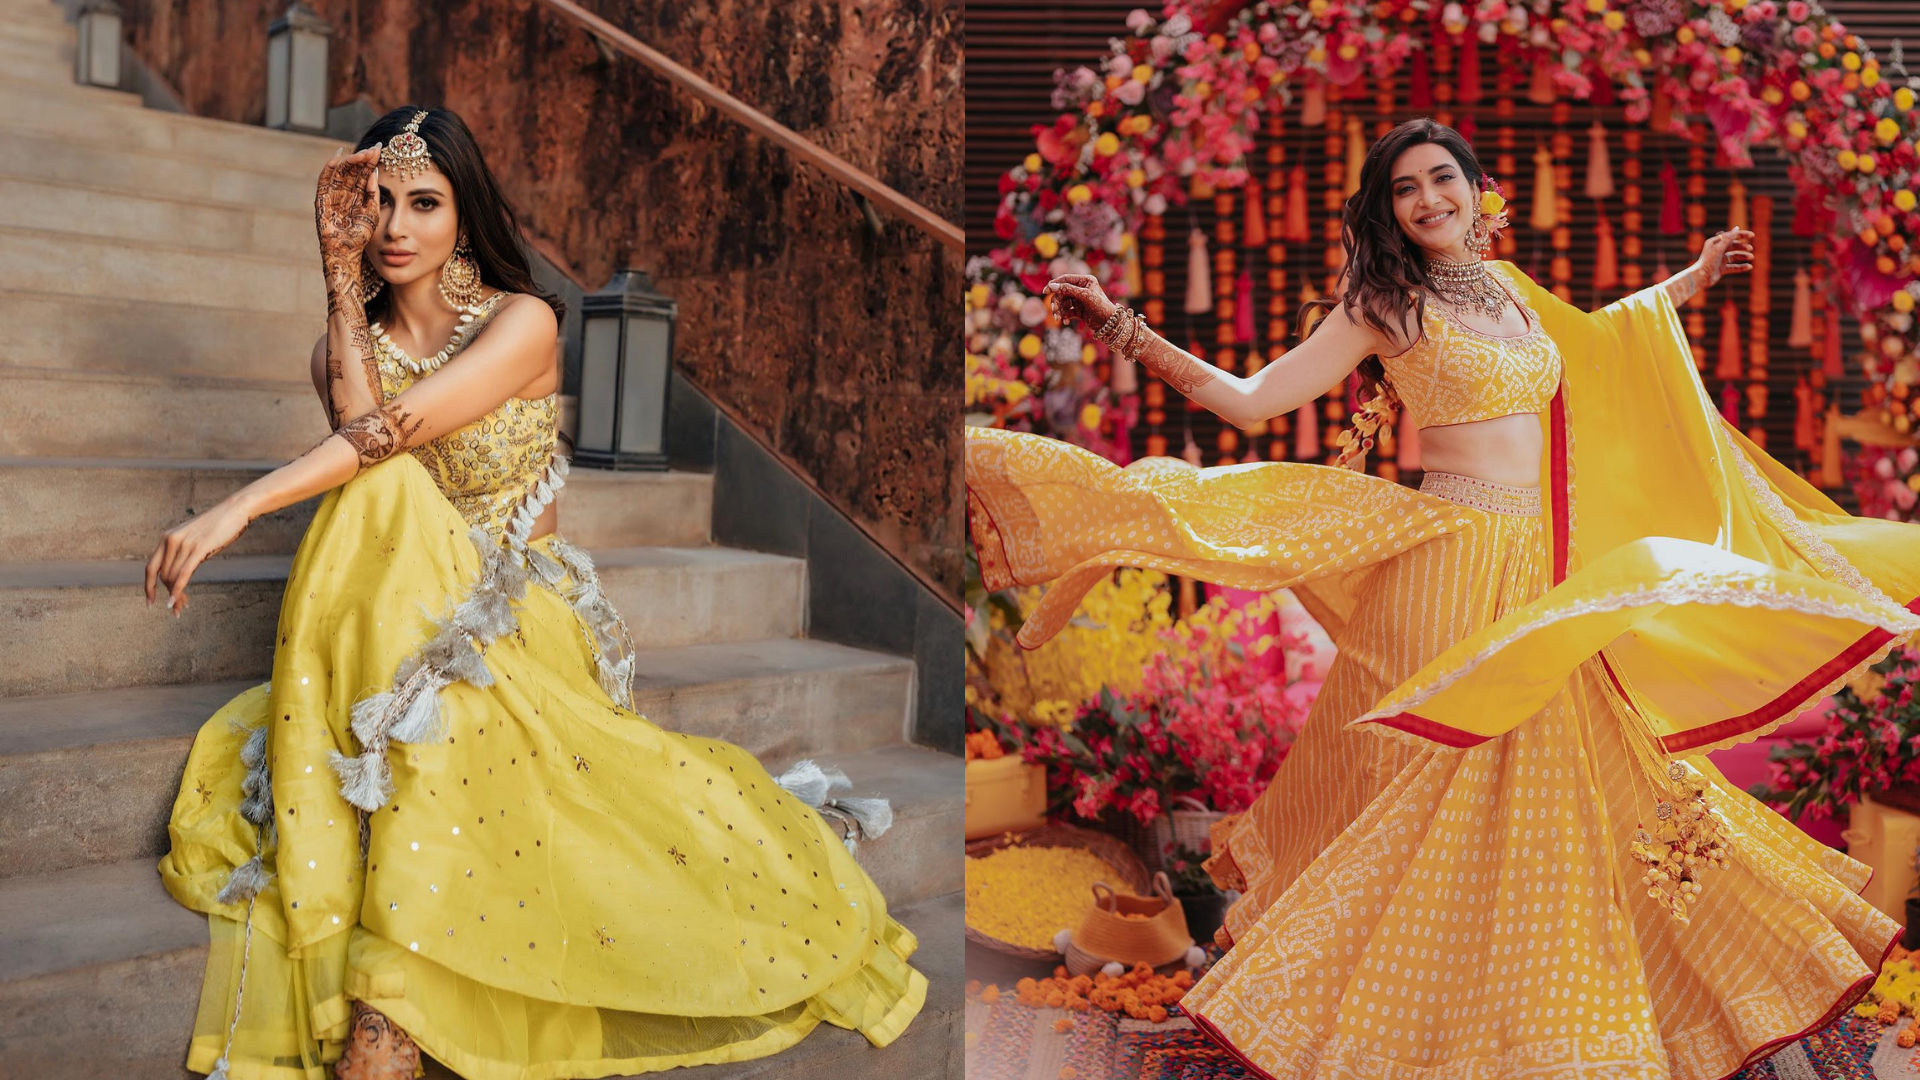 Karishma Tanna’s haldi and mehendi styles resounded with that of Mouni Roy, see how